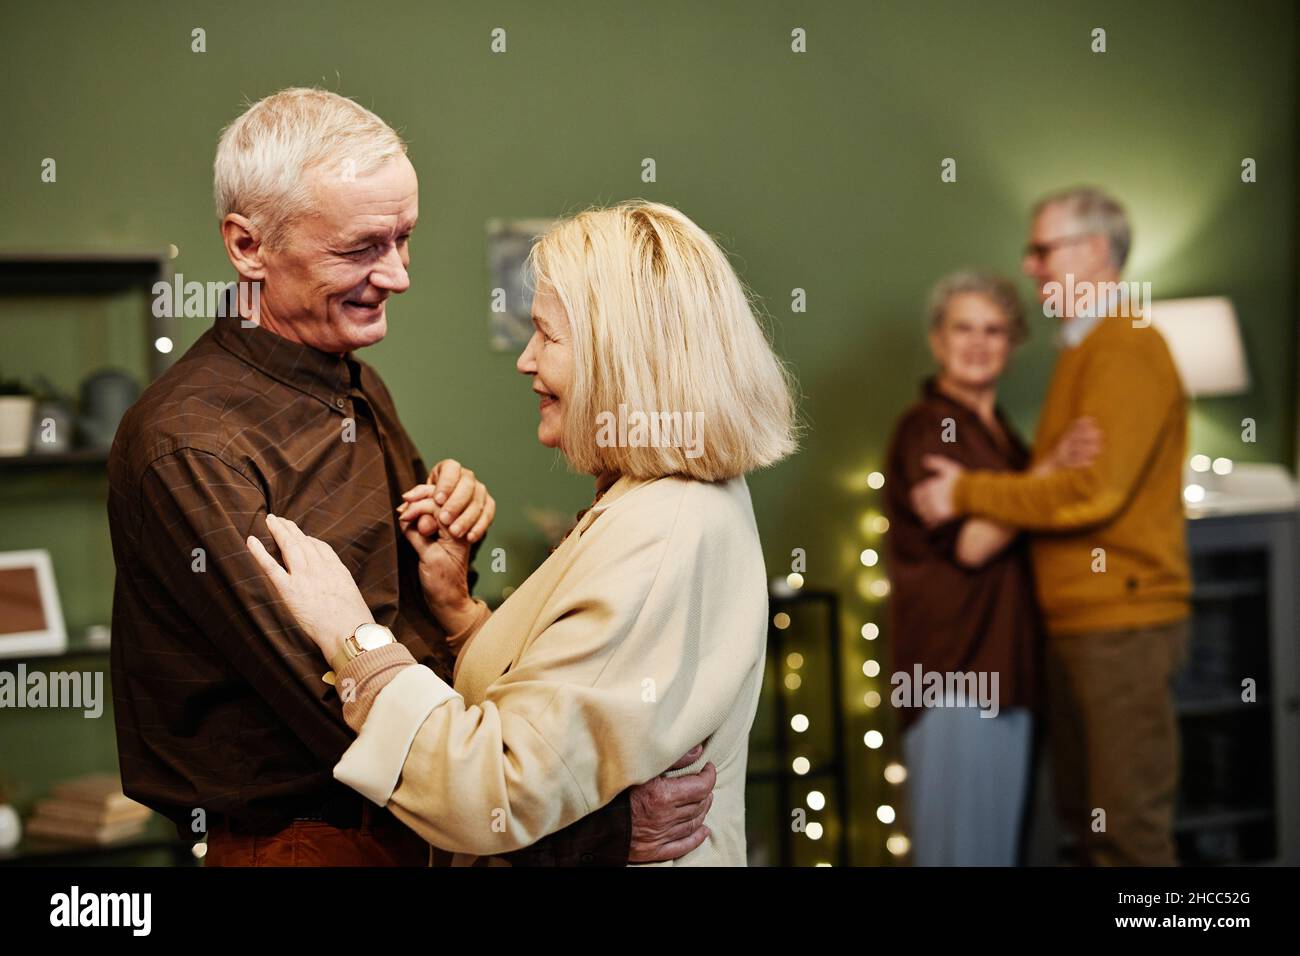 Two aged couples dancing in decorated with lights living room. Aged good-looking man with grey hair looking tenderly at his wife while dancing Stock Photo